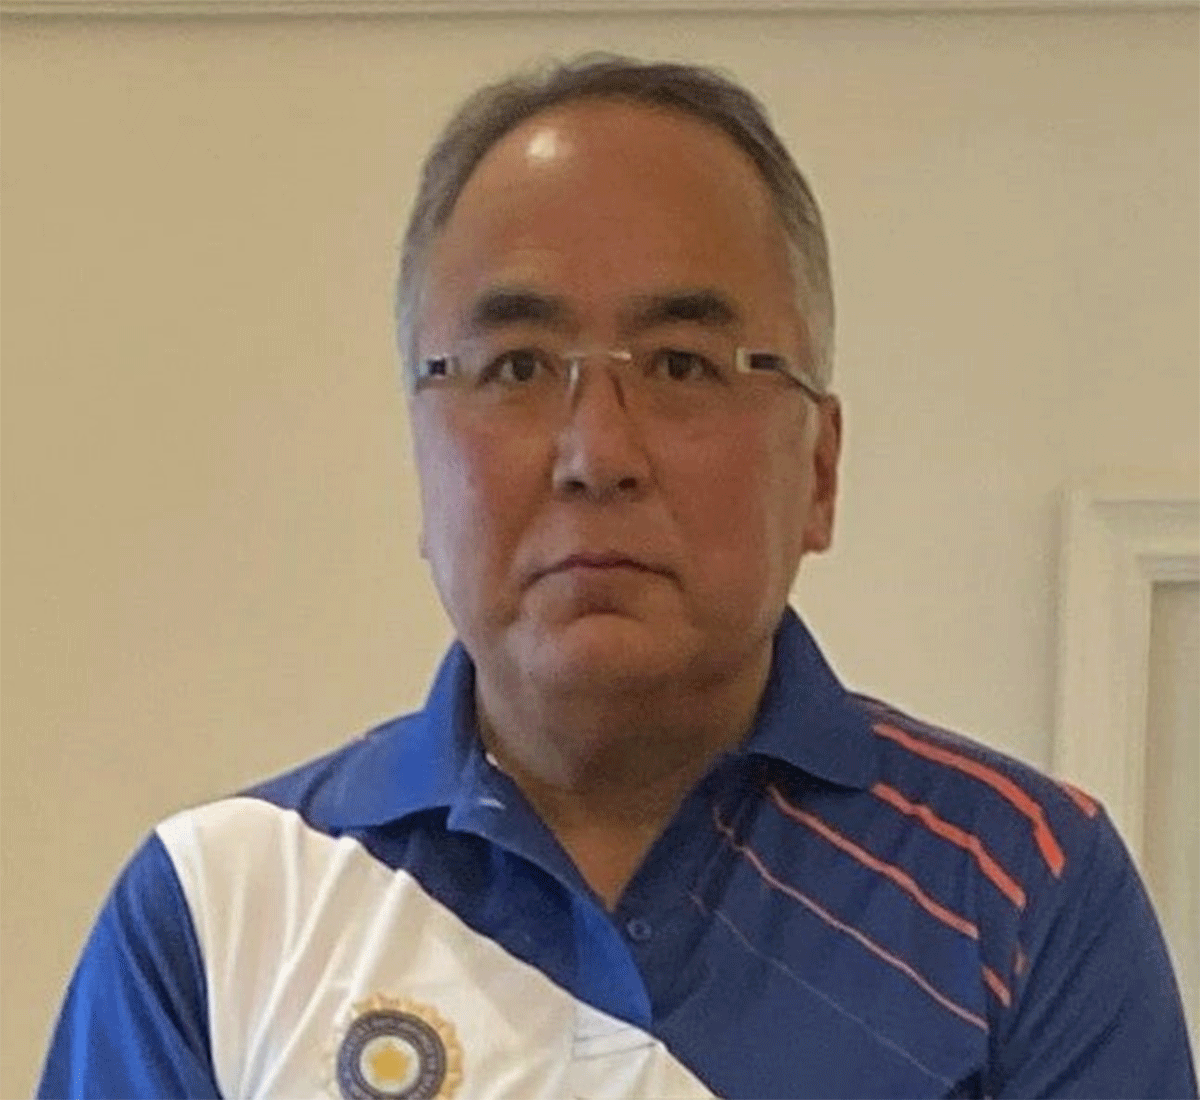 Under-19 Indian team manager Lobzang G. Tenzing said that the players were inconsolable after seven of them were asked to go back for not being vaccinated